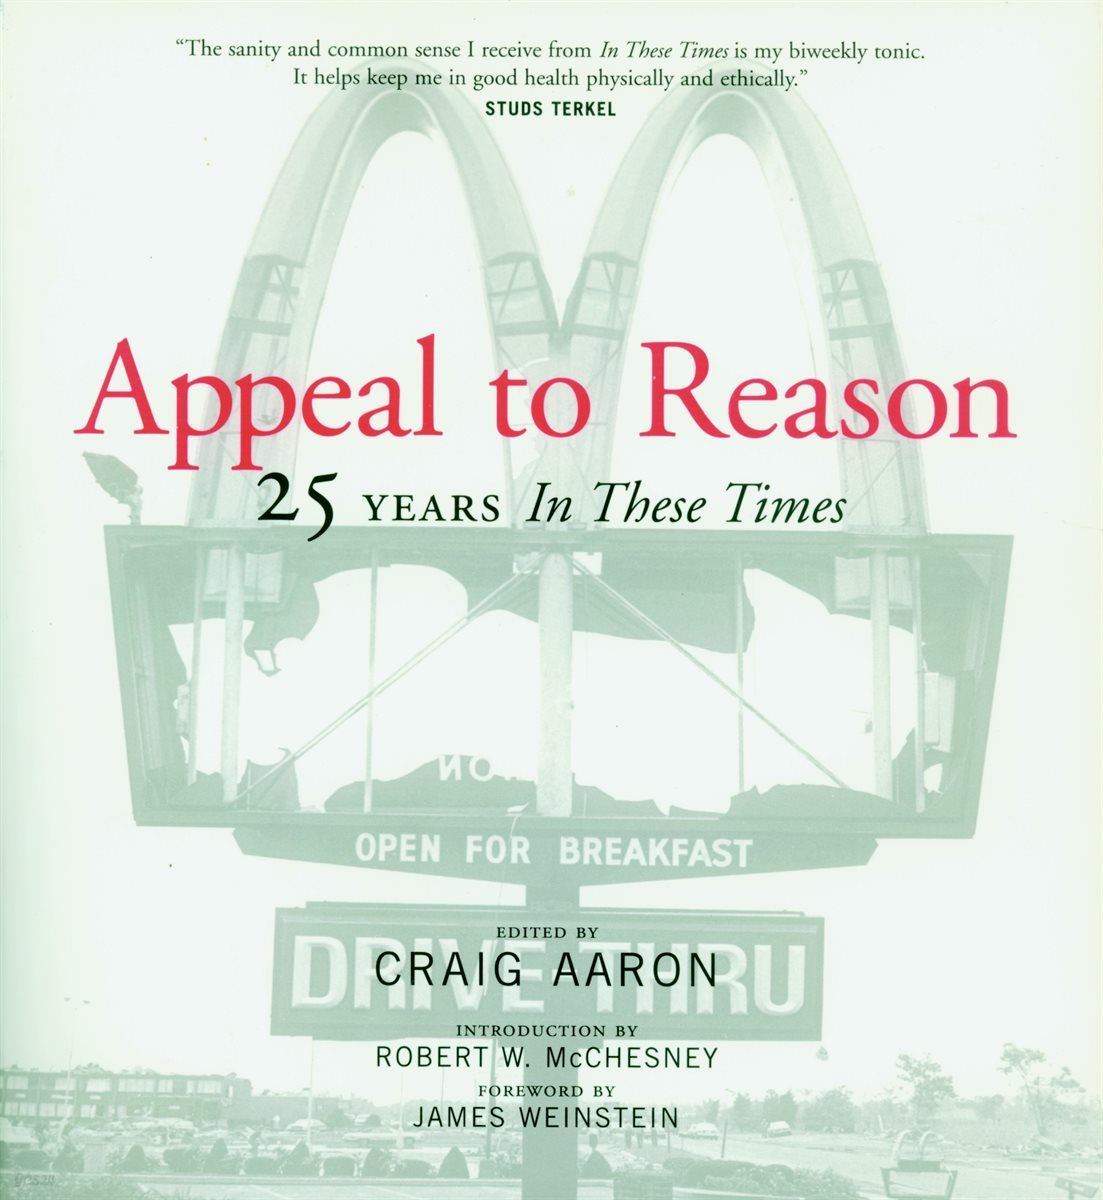 Appeal to Reason